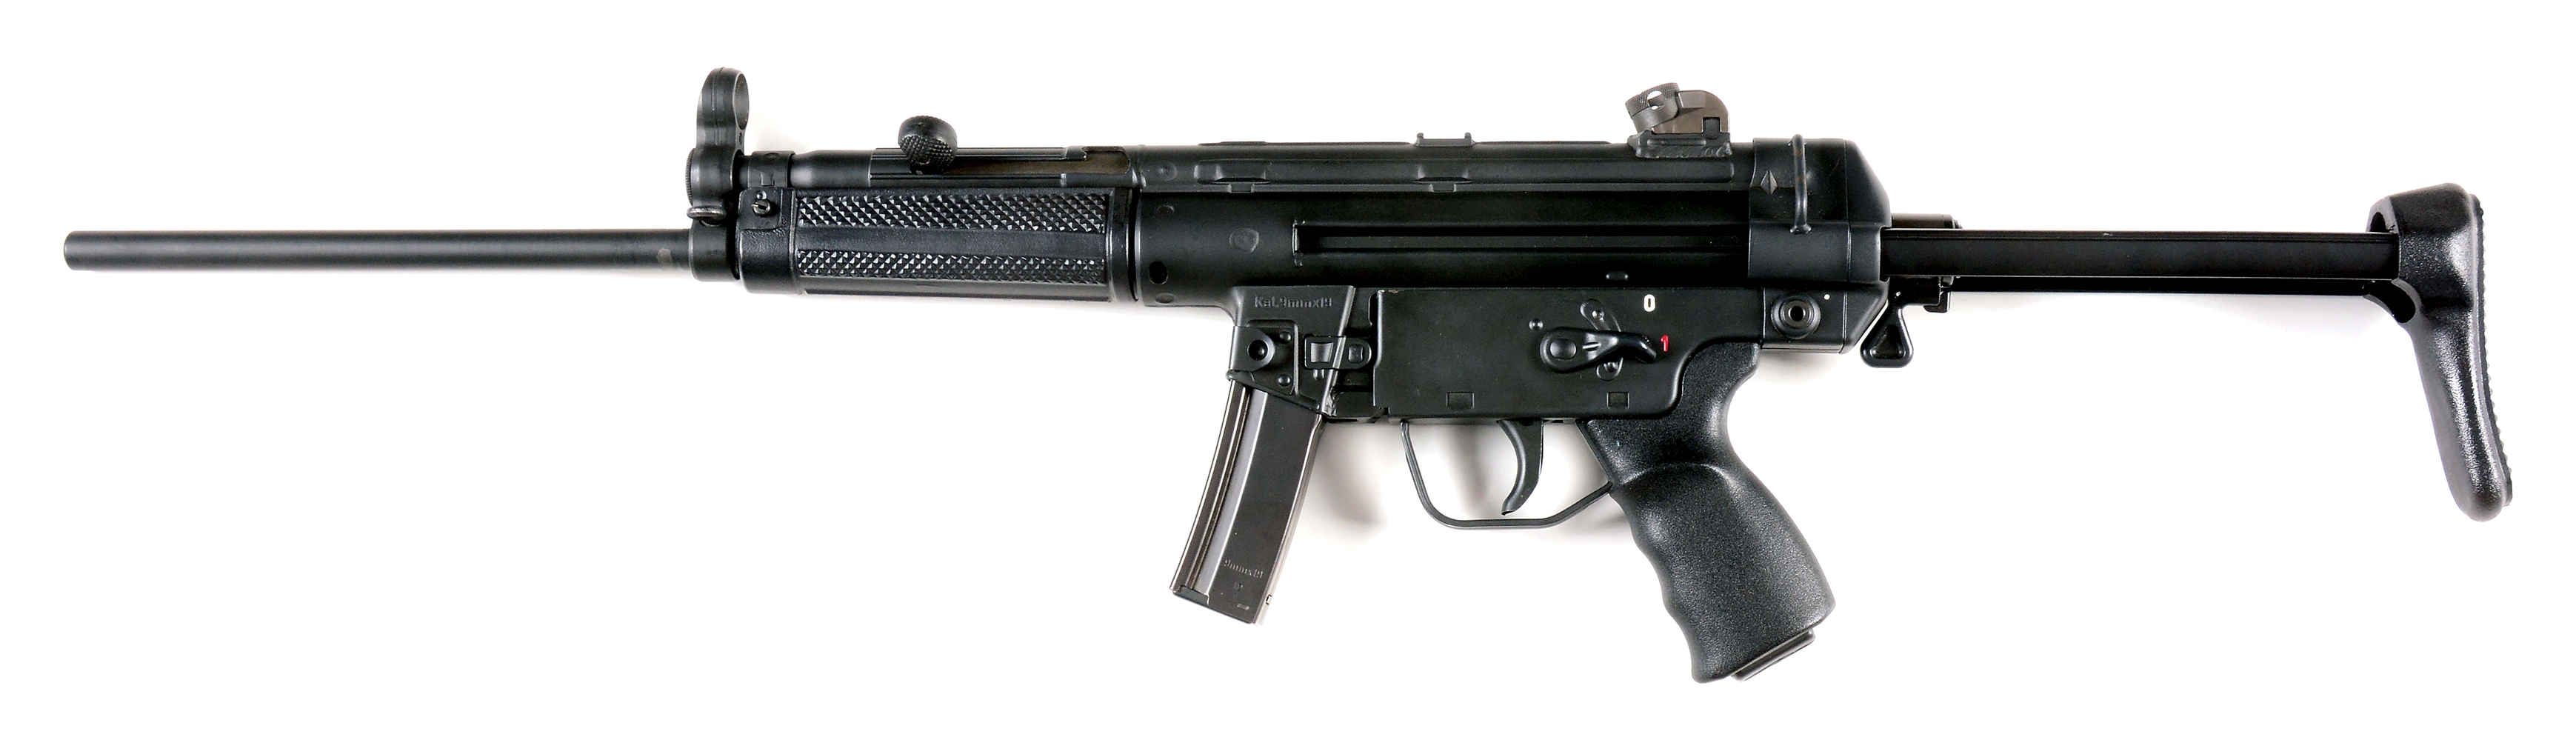 M) a very good pre-ban heckler & koch HK94A3 semi-automatic rifle with ...